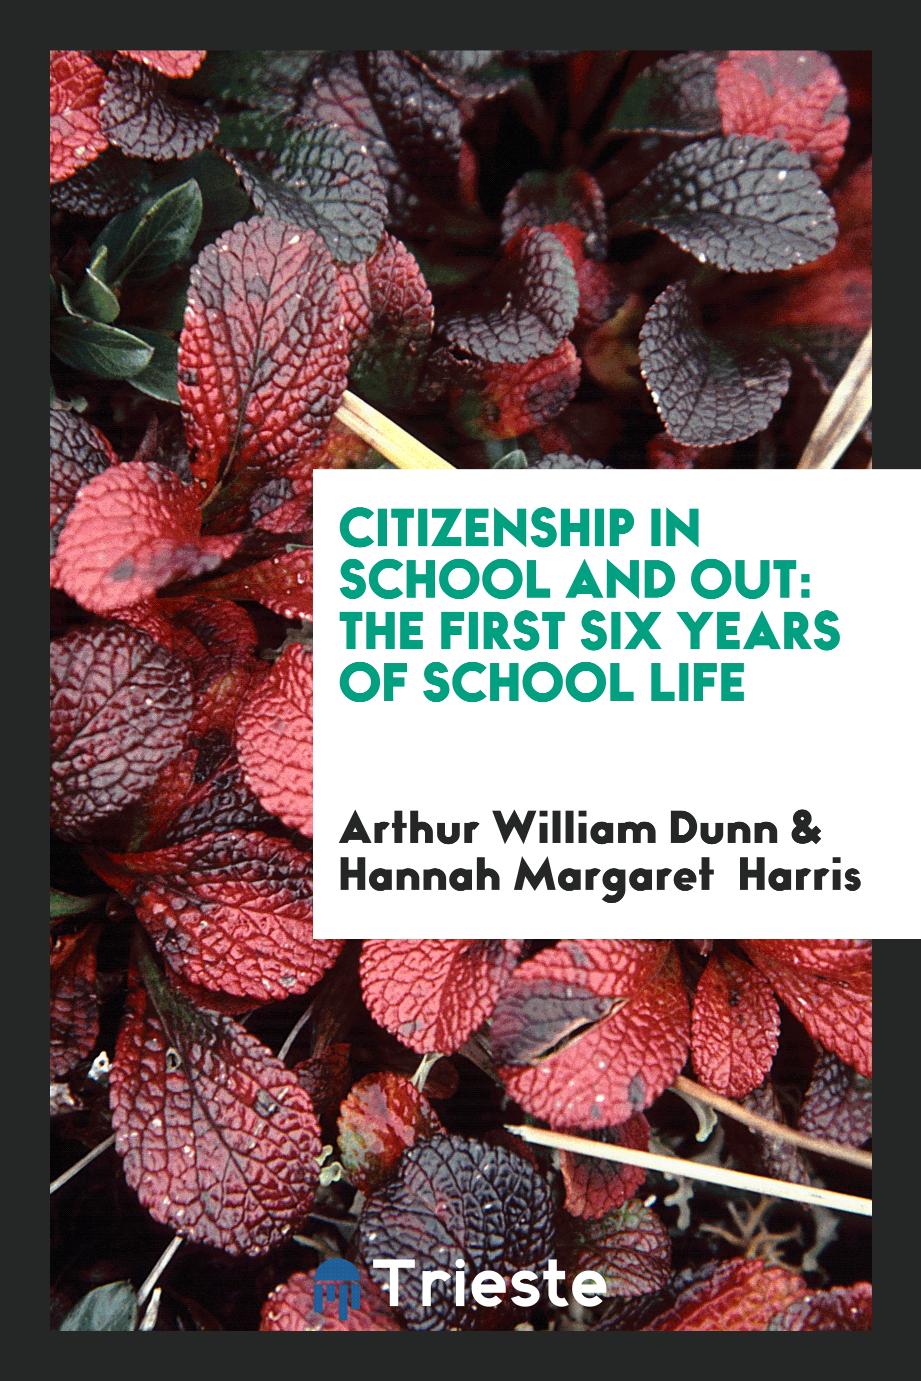 Citizenship in School and Out: The First Six Years of School Life